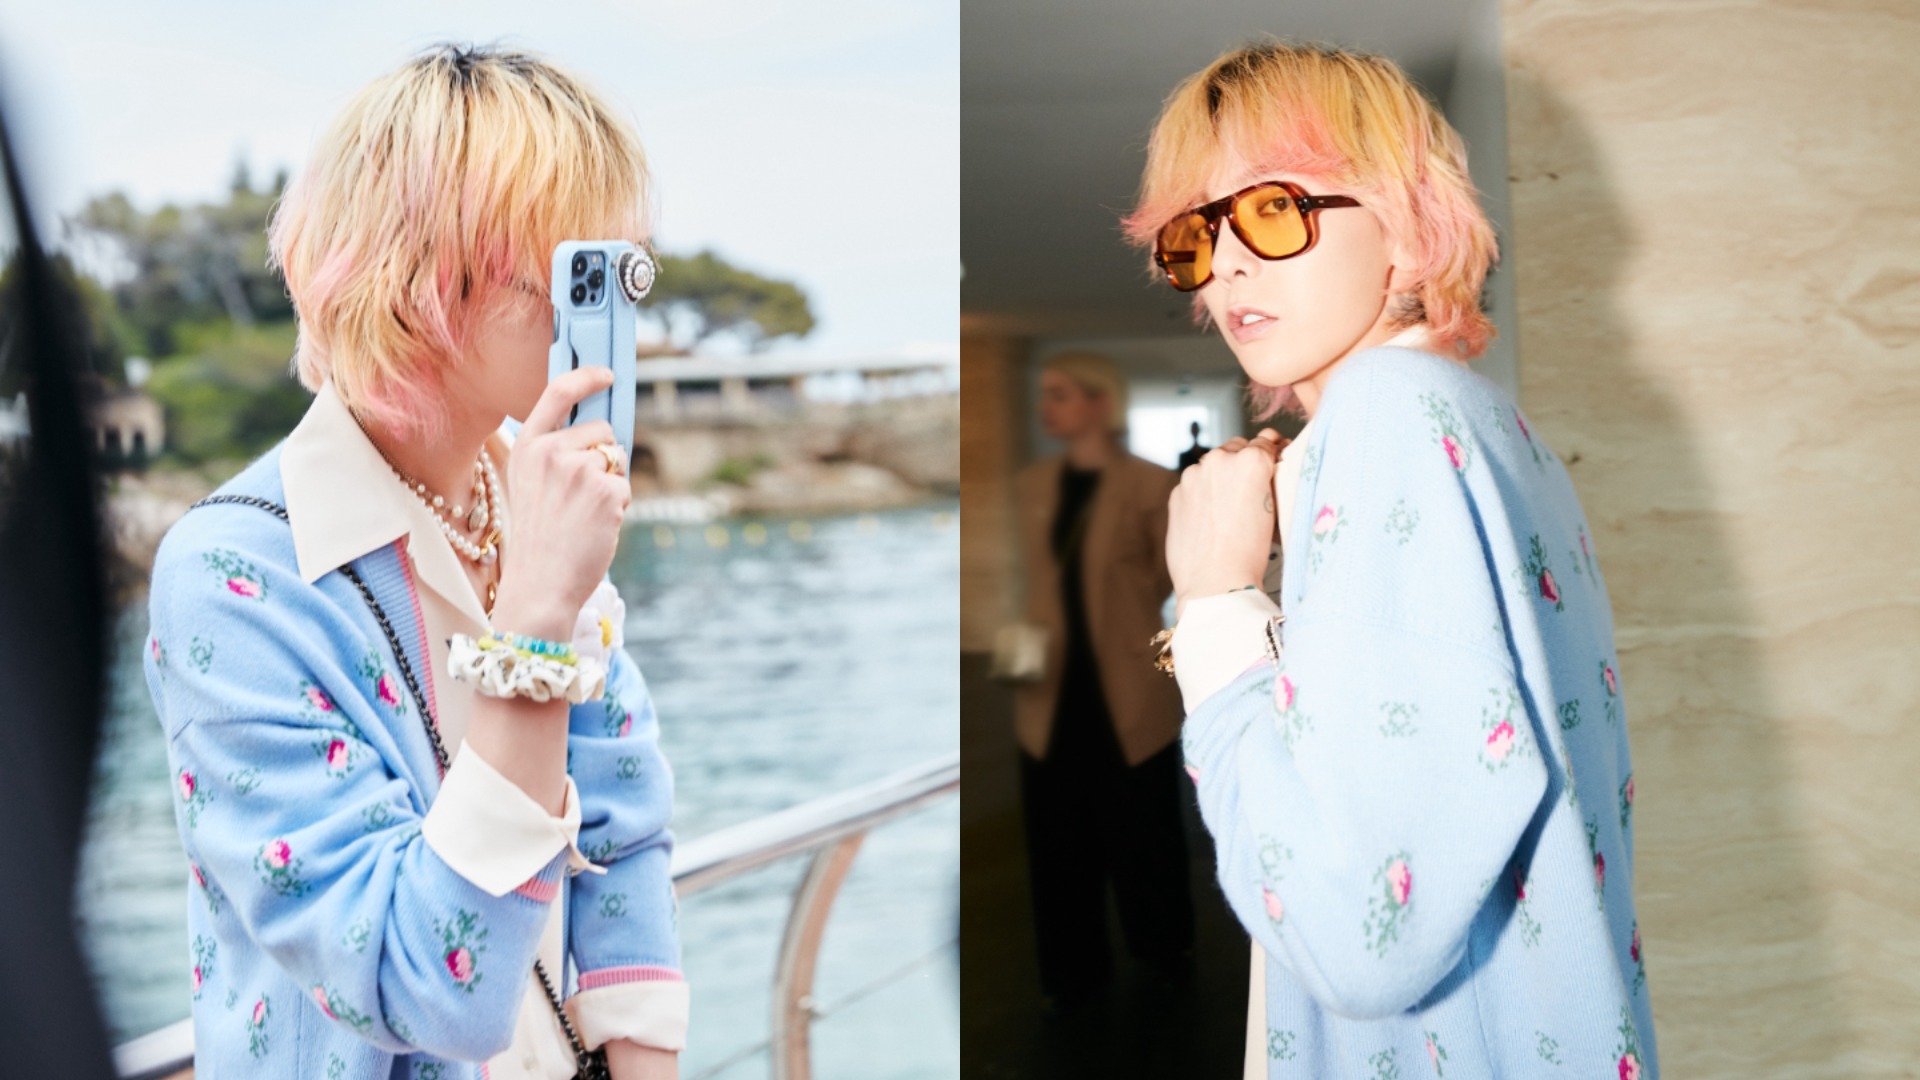 An interview with G-Dragon before Chanel Cruise